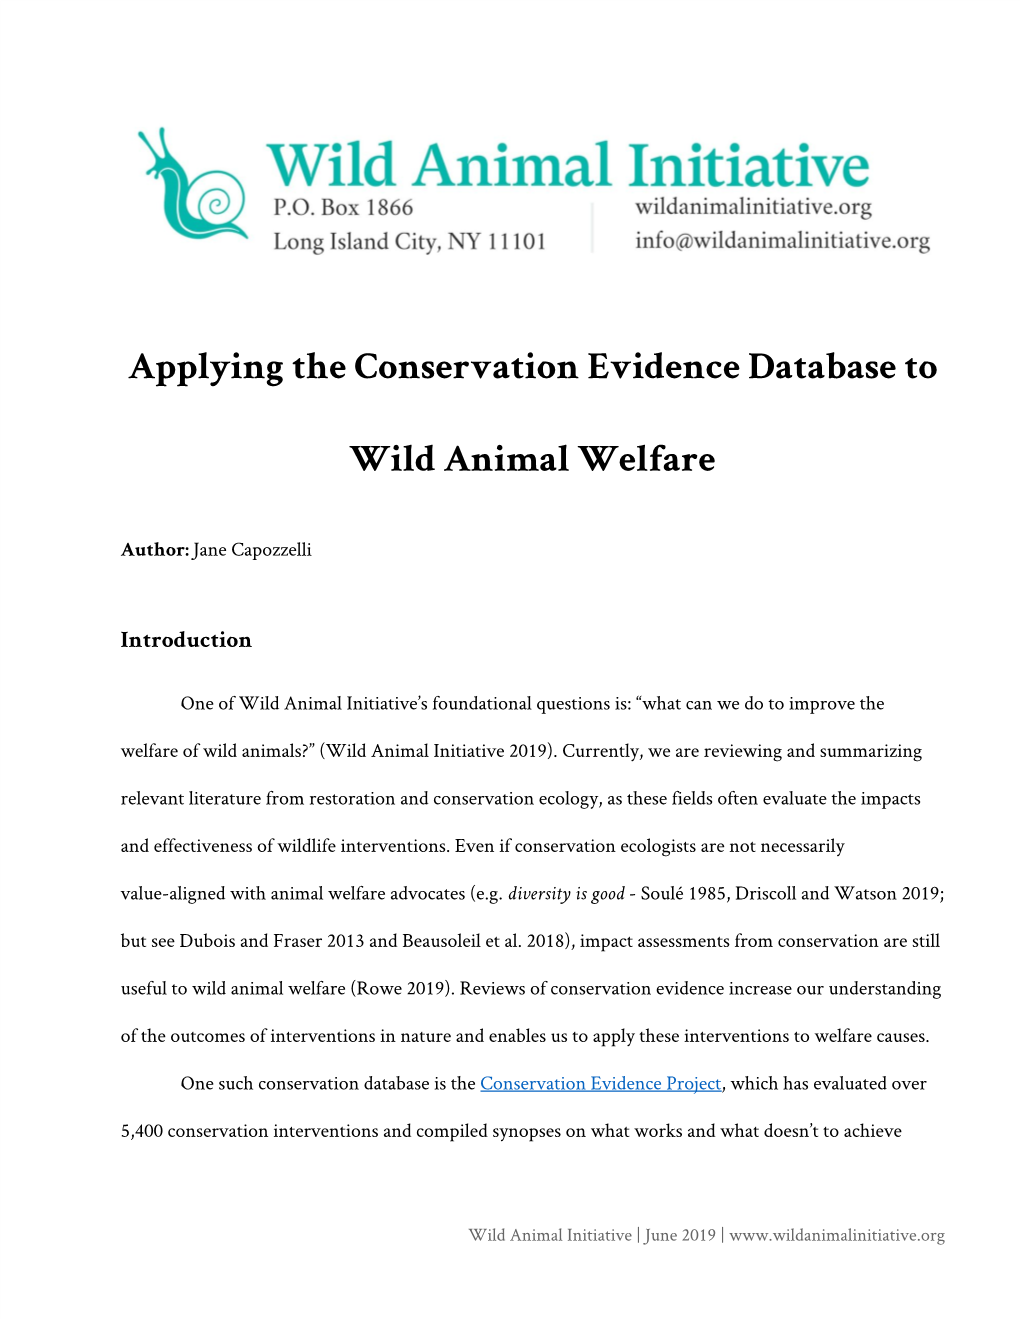 Applying the Conservation Evidence Database to Wild Animal Welfare